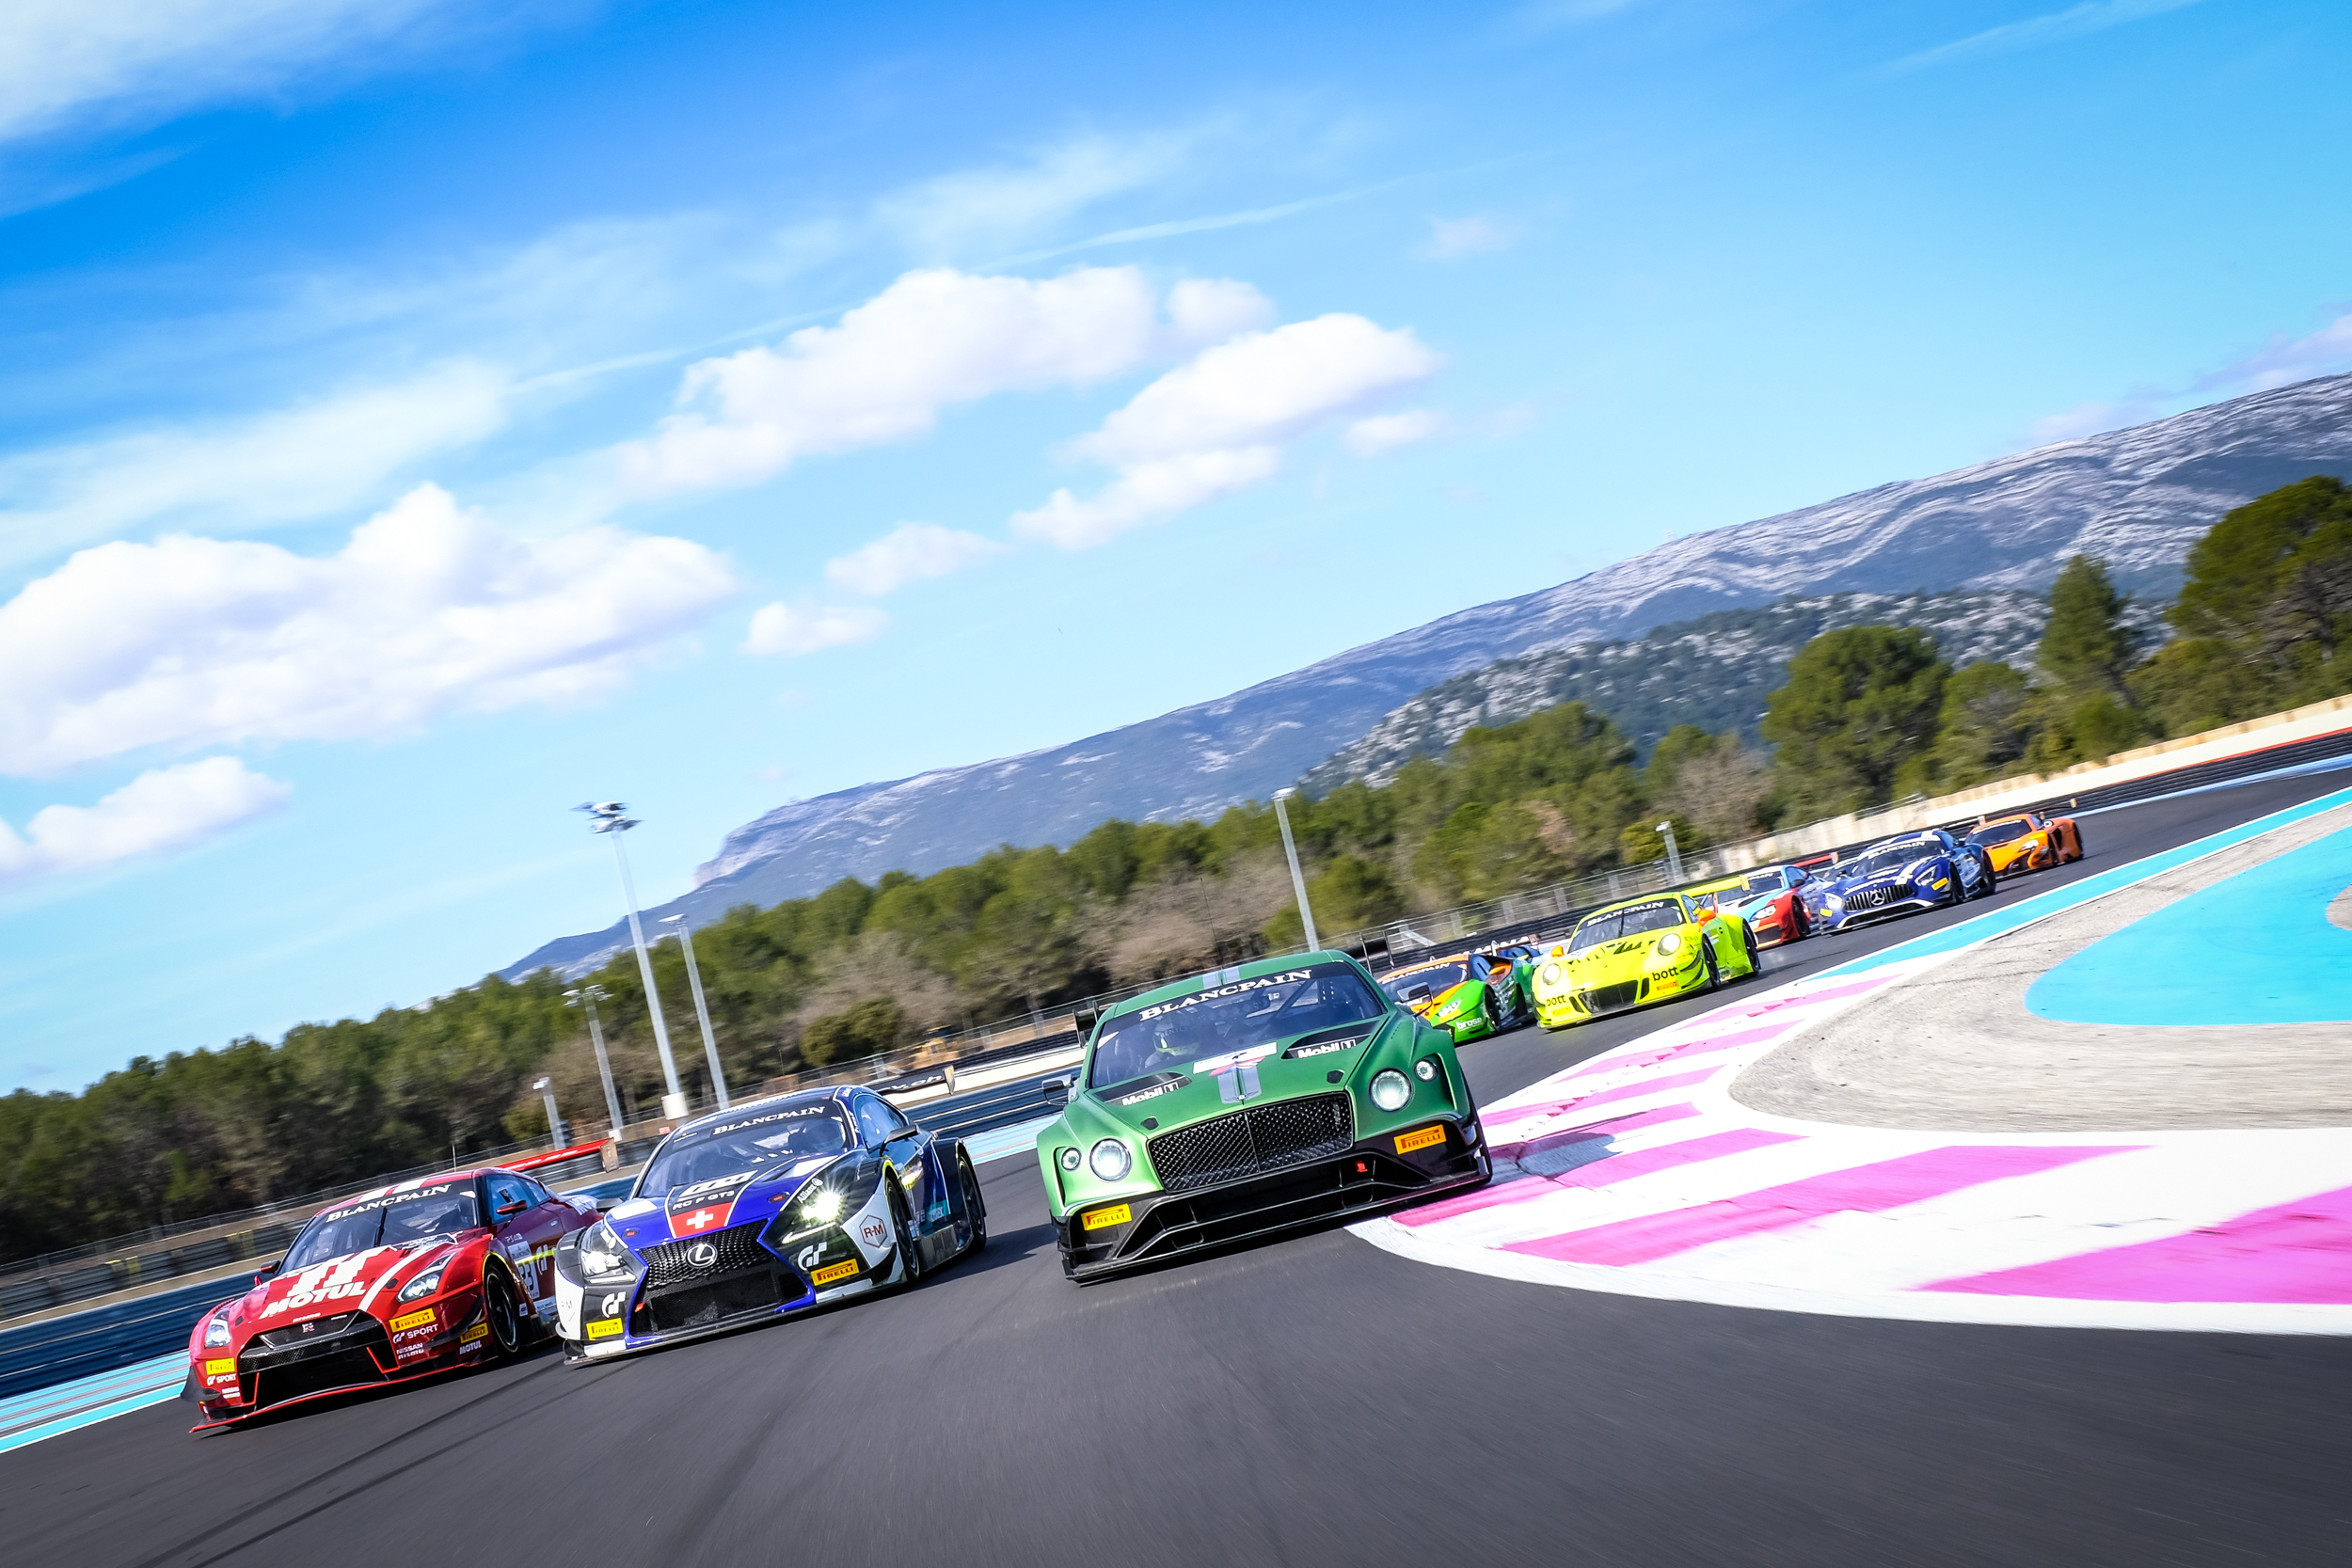 Blancpain GT Series announces full 2018 entry list with 50 cars 11 manufacturers Fanatec GT World Challenge Europe Powered AWS